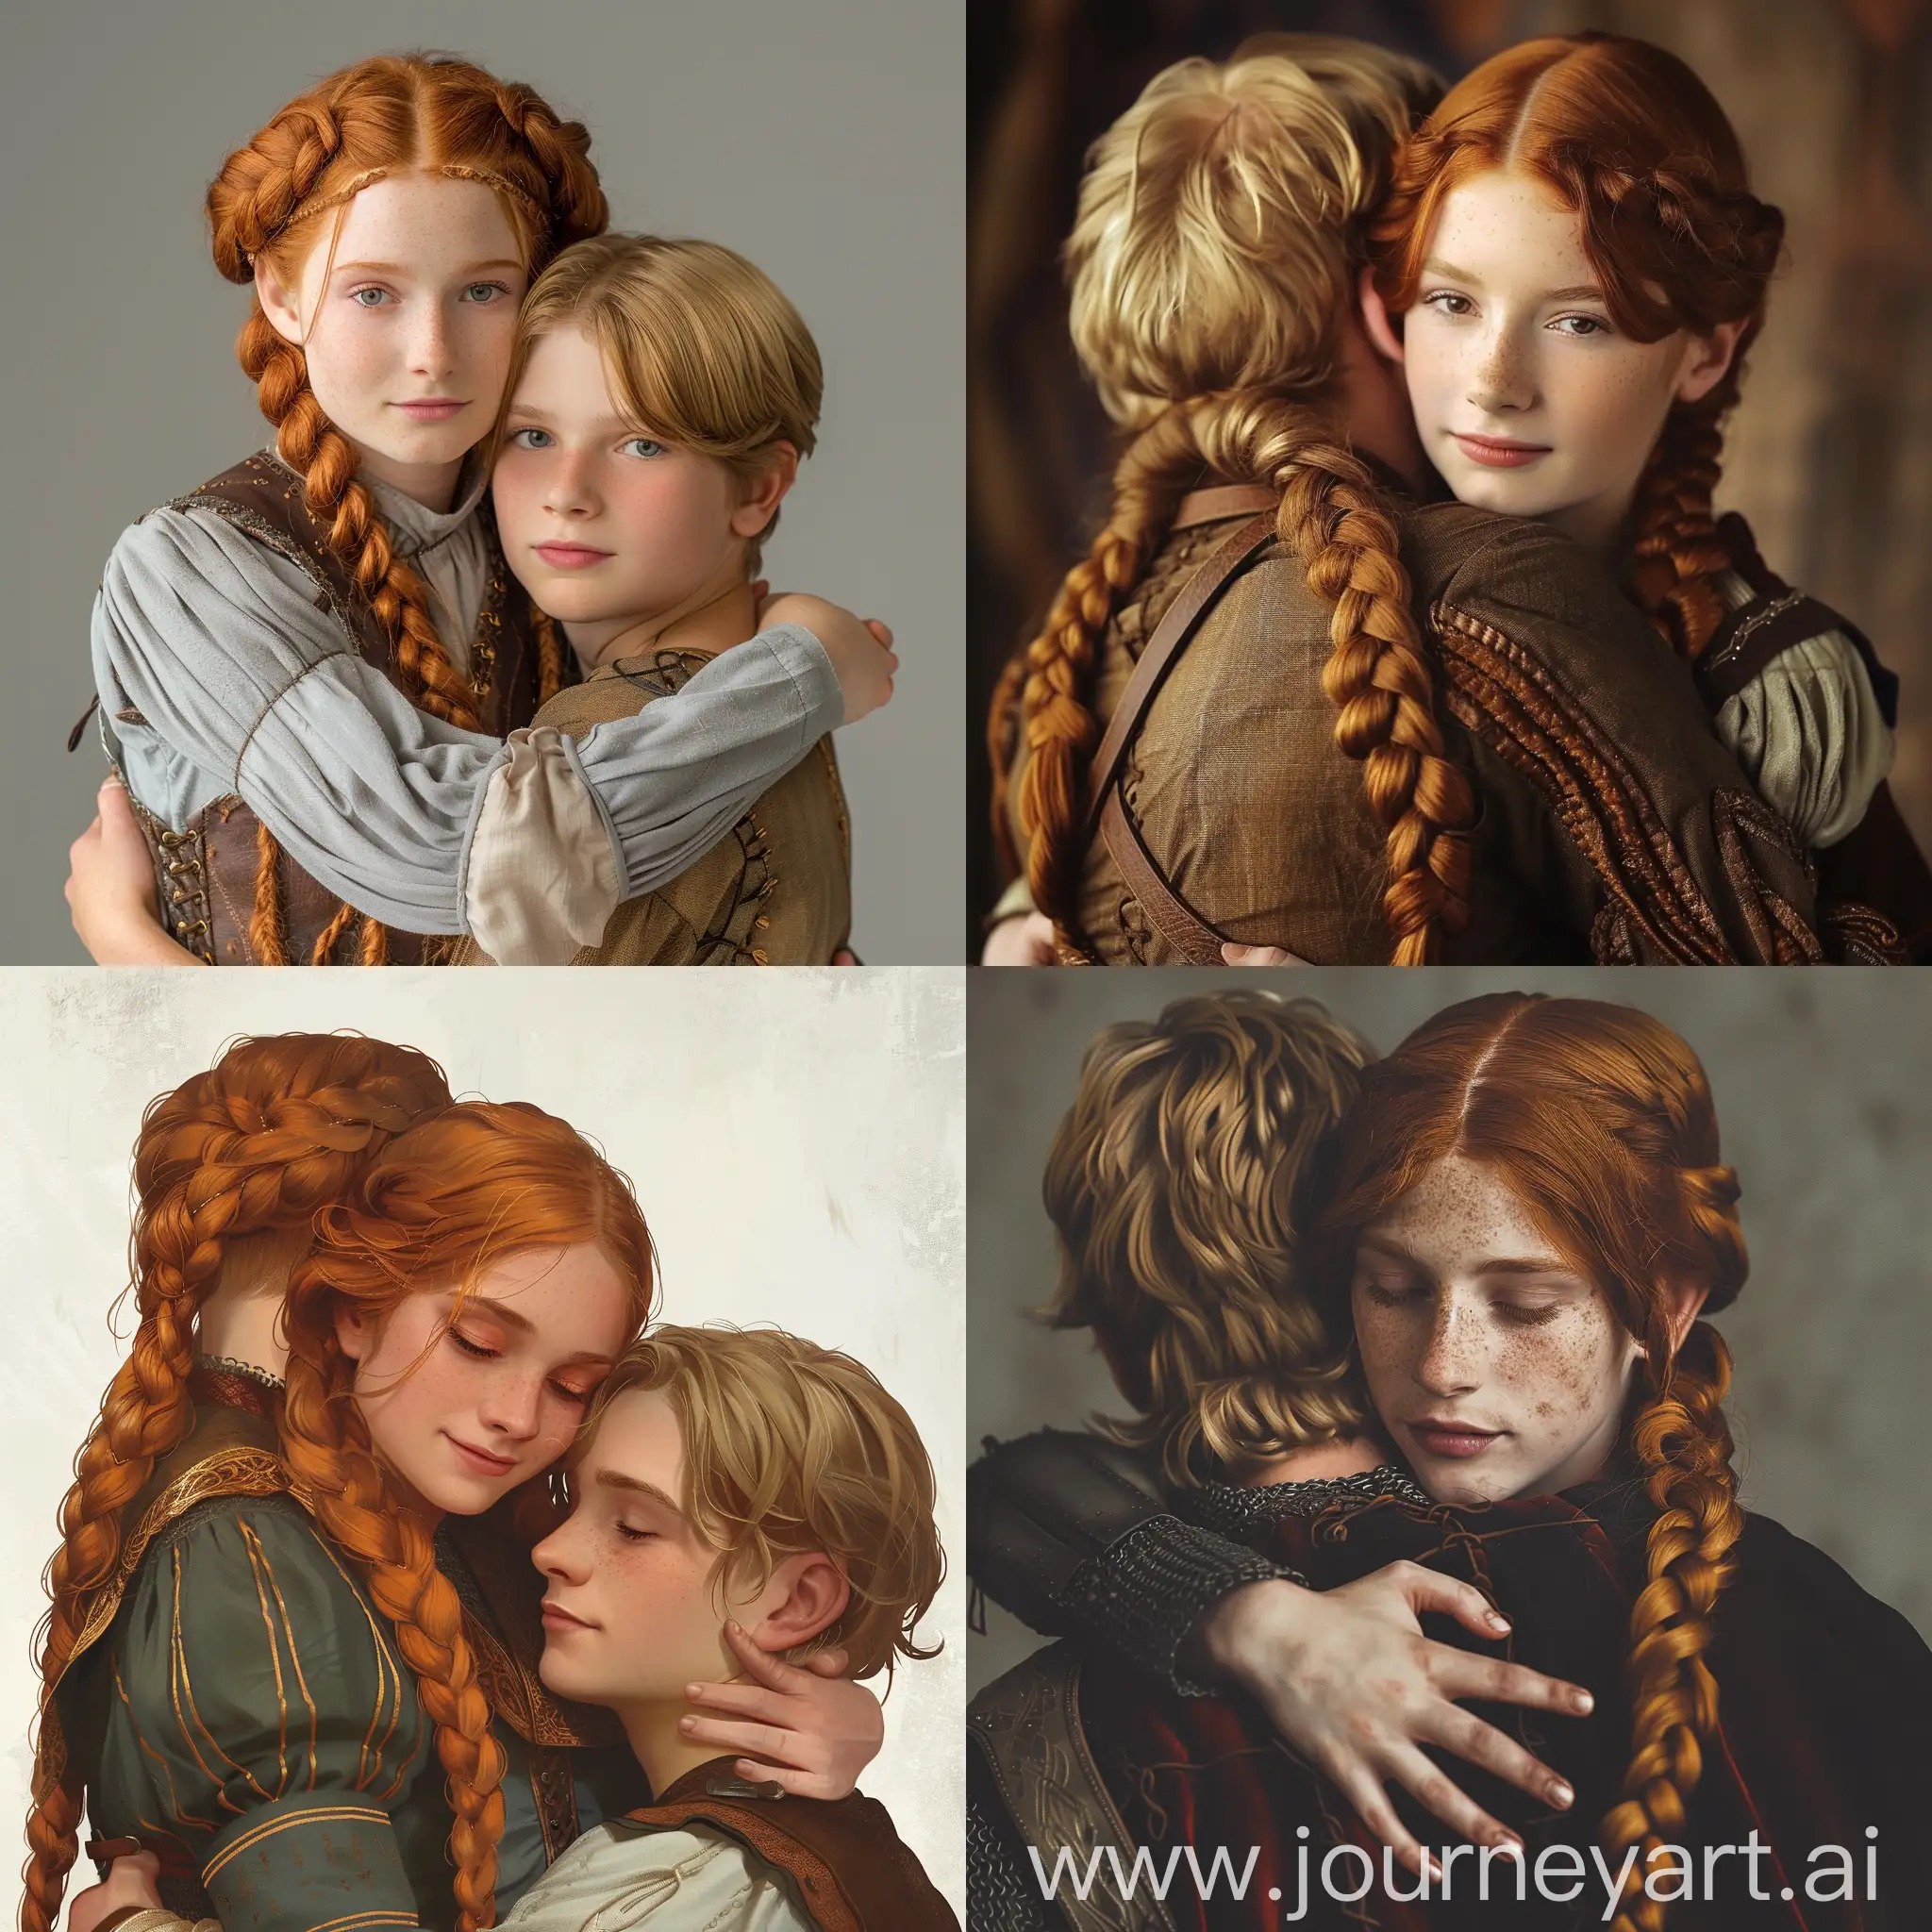 In the style of a medieval romance novel book cover. A young 25 year old woman, attractive, with ginger hair in long double braids. Seductive outfit. She is hugging 25 year old young man with blonde hair.